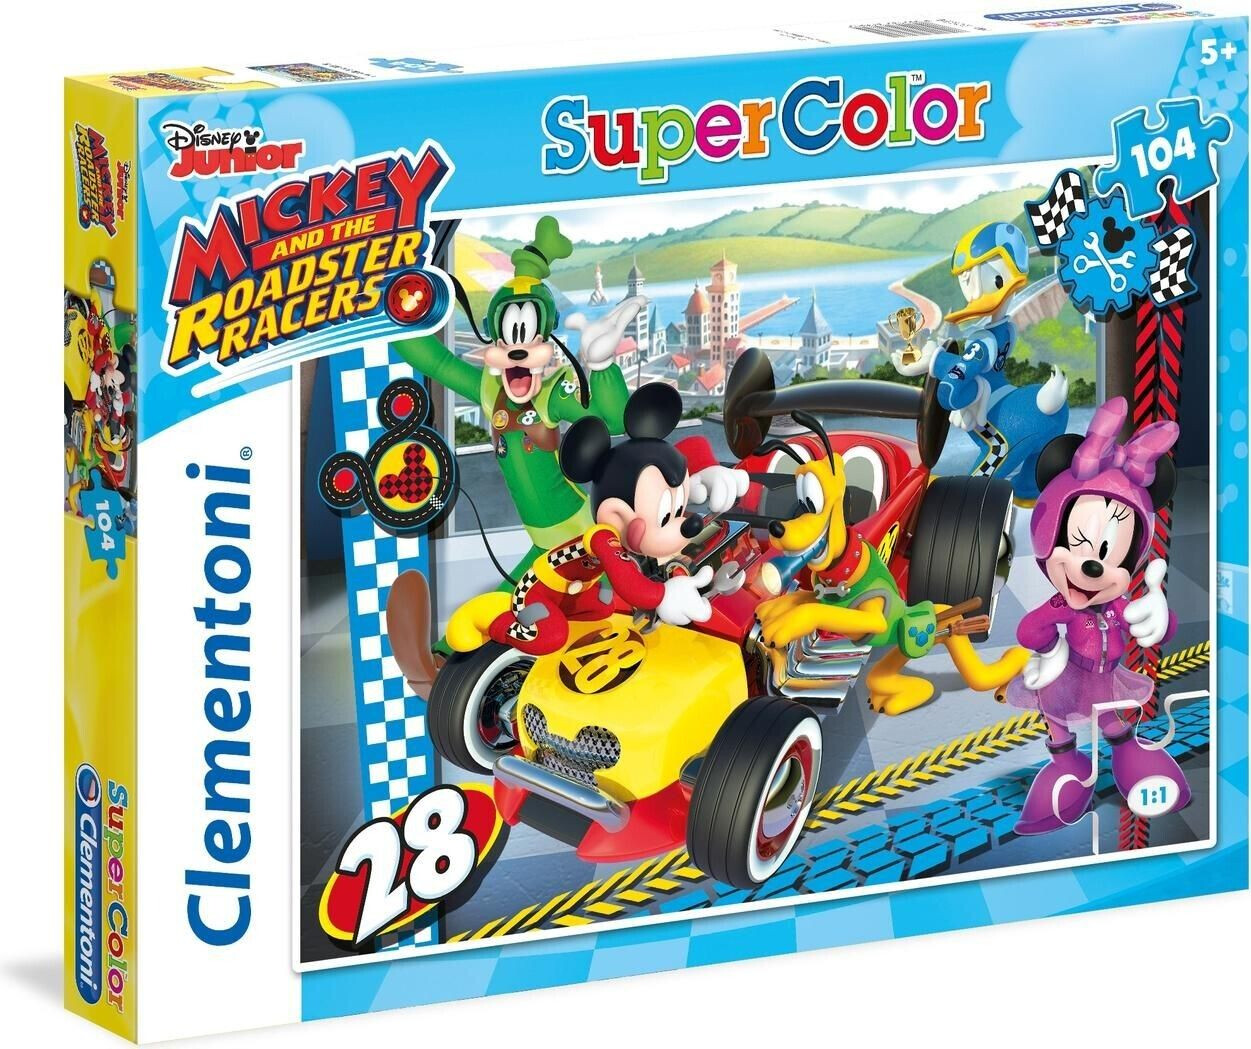 Photos - Jigsaw Puzzle / Mosaic Clementoni Supercolor Mickey and The Roadster Racers  (104 pcs.)